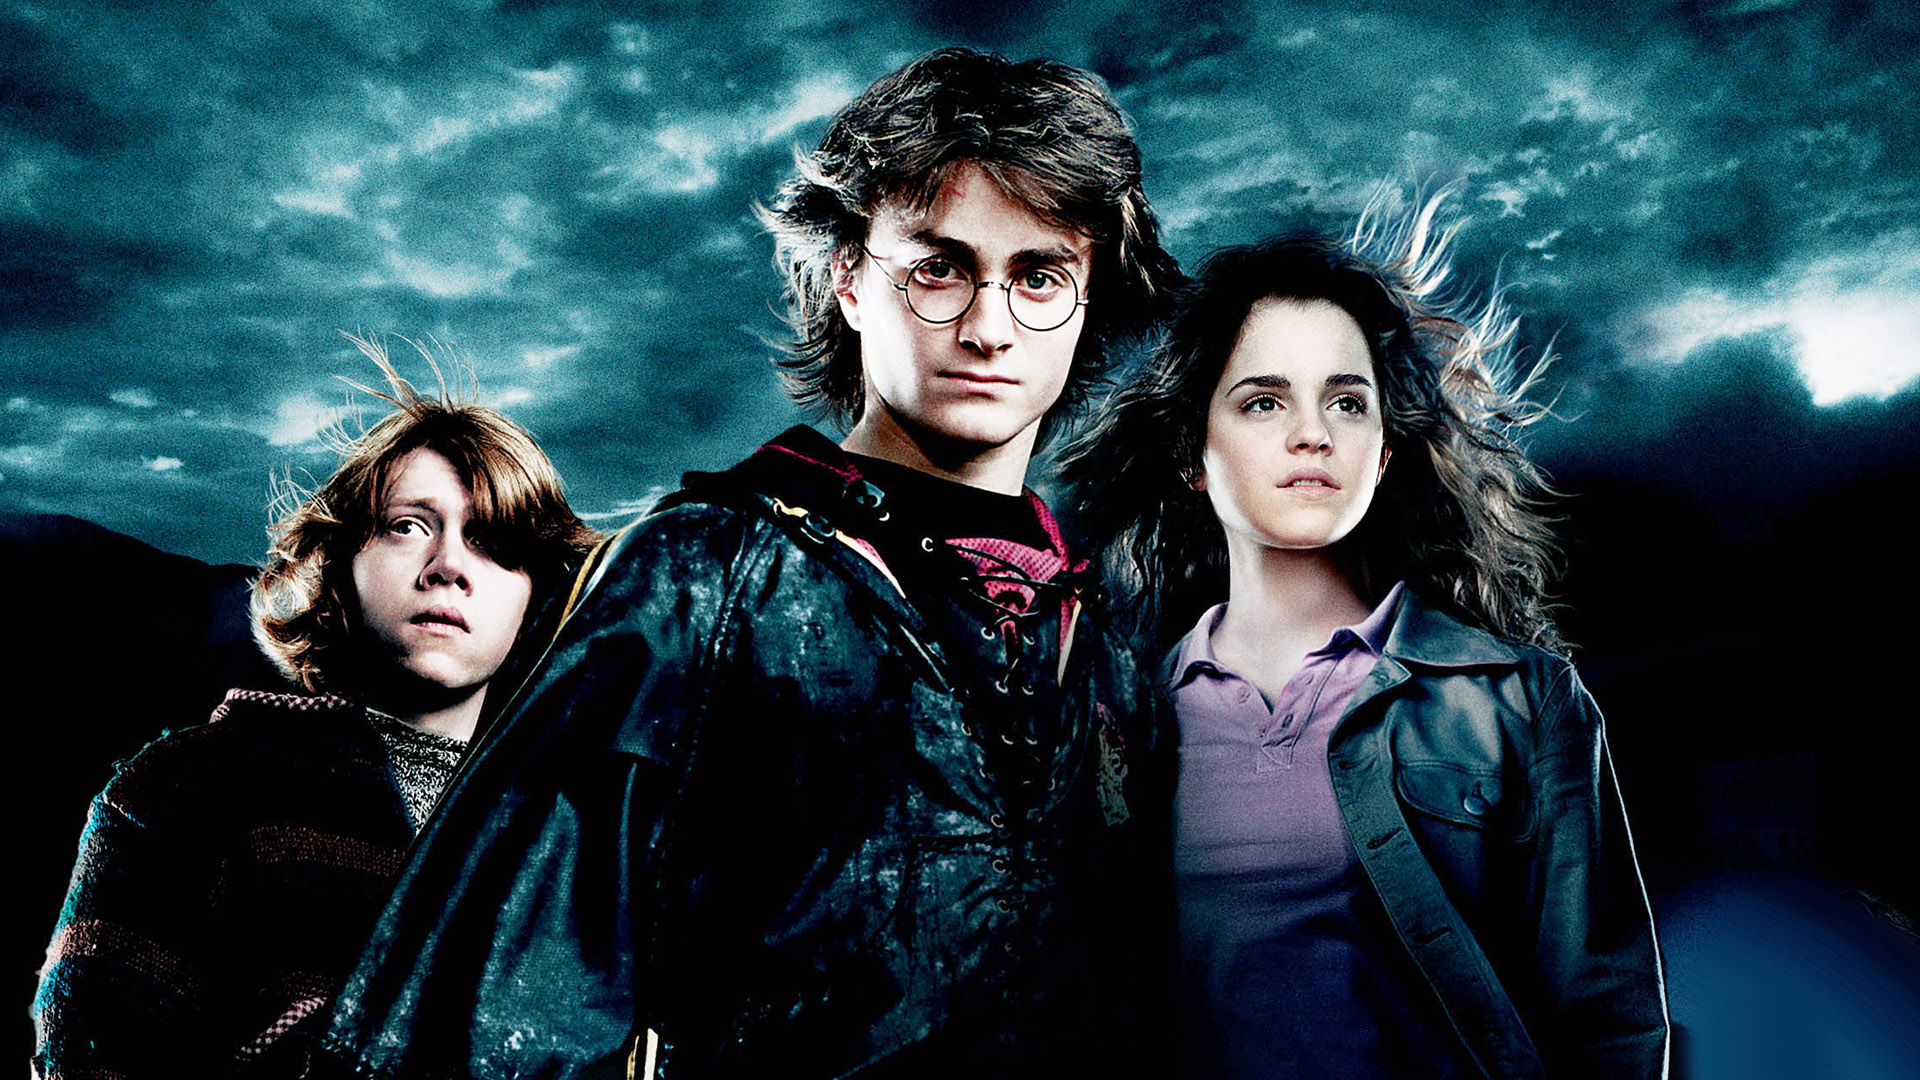 One Harry Potter Star Looks Totally Unrecognizable 20 Years Later